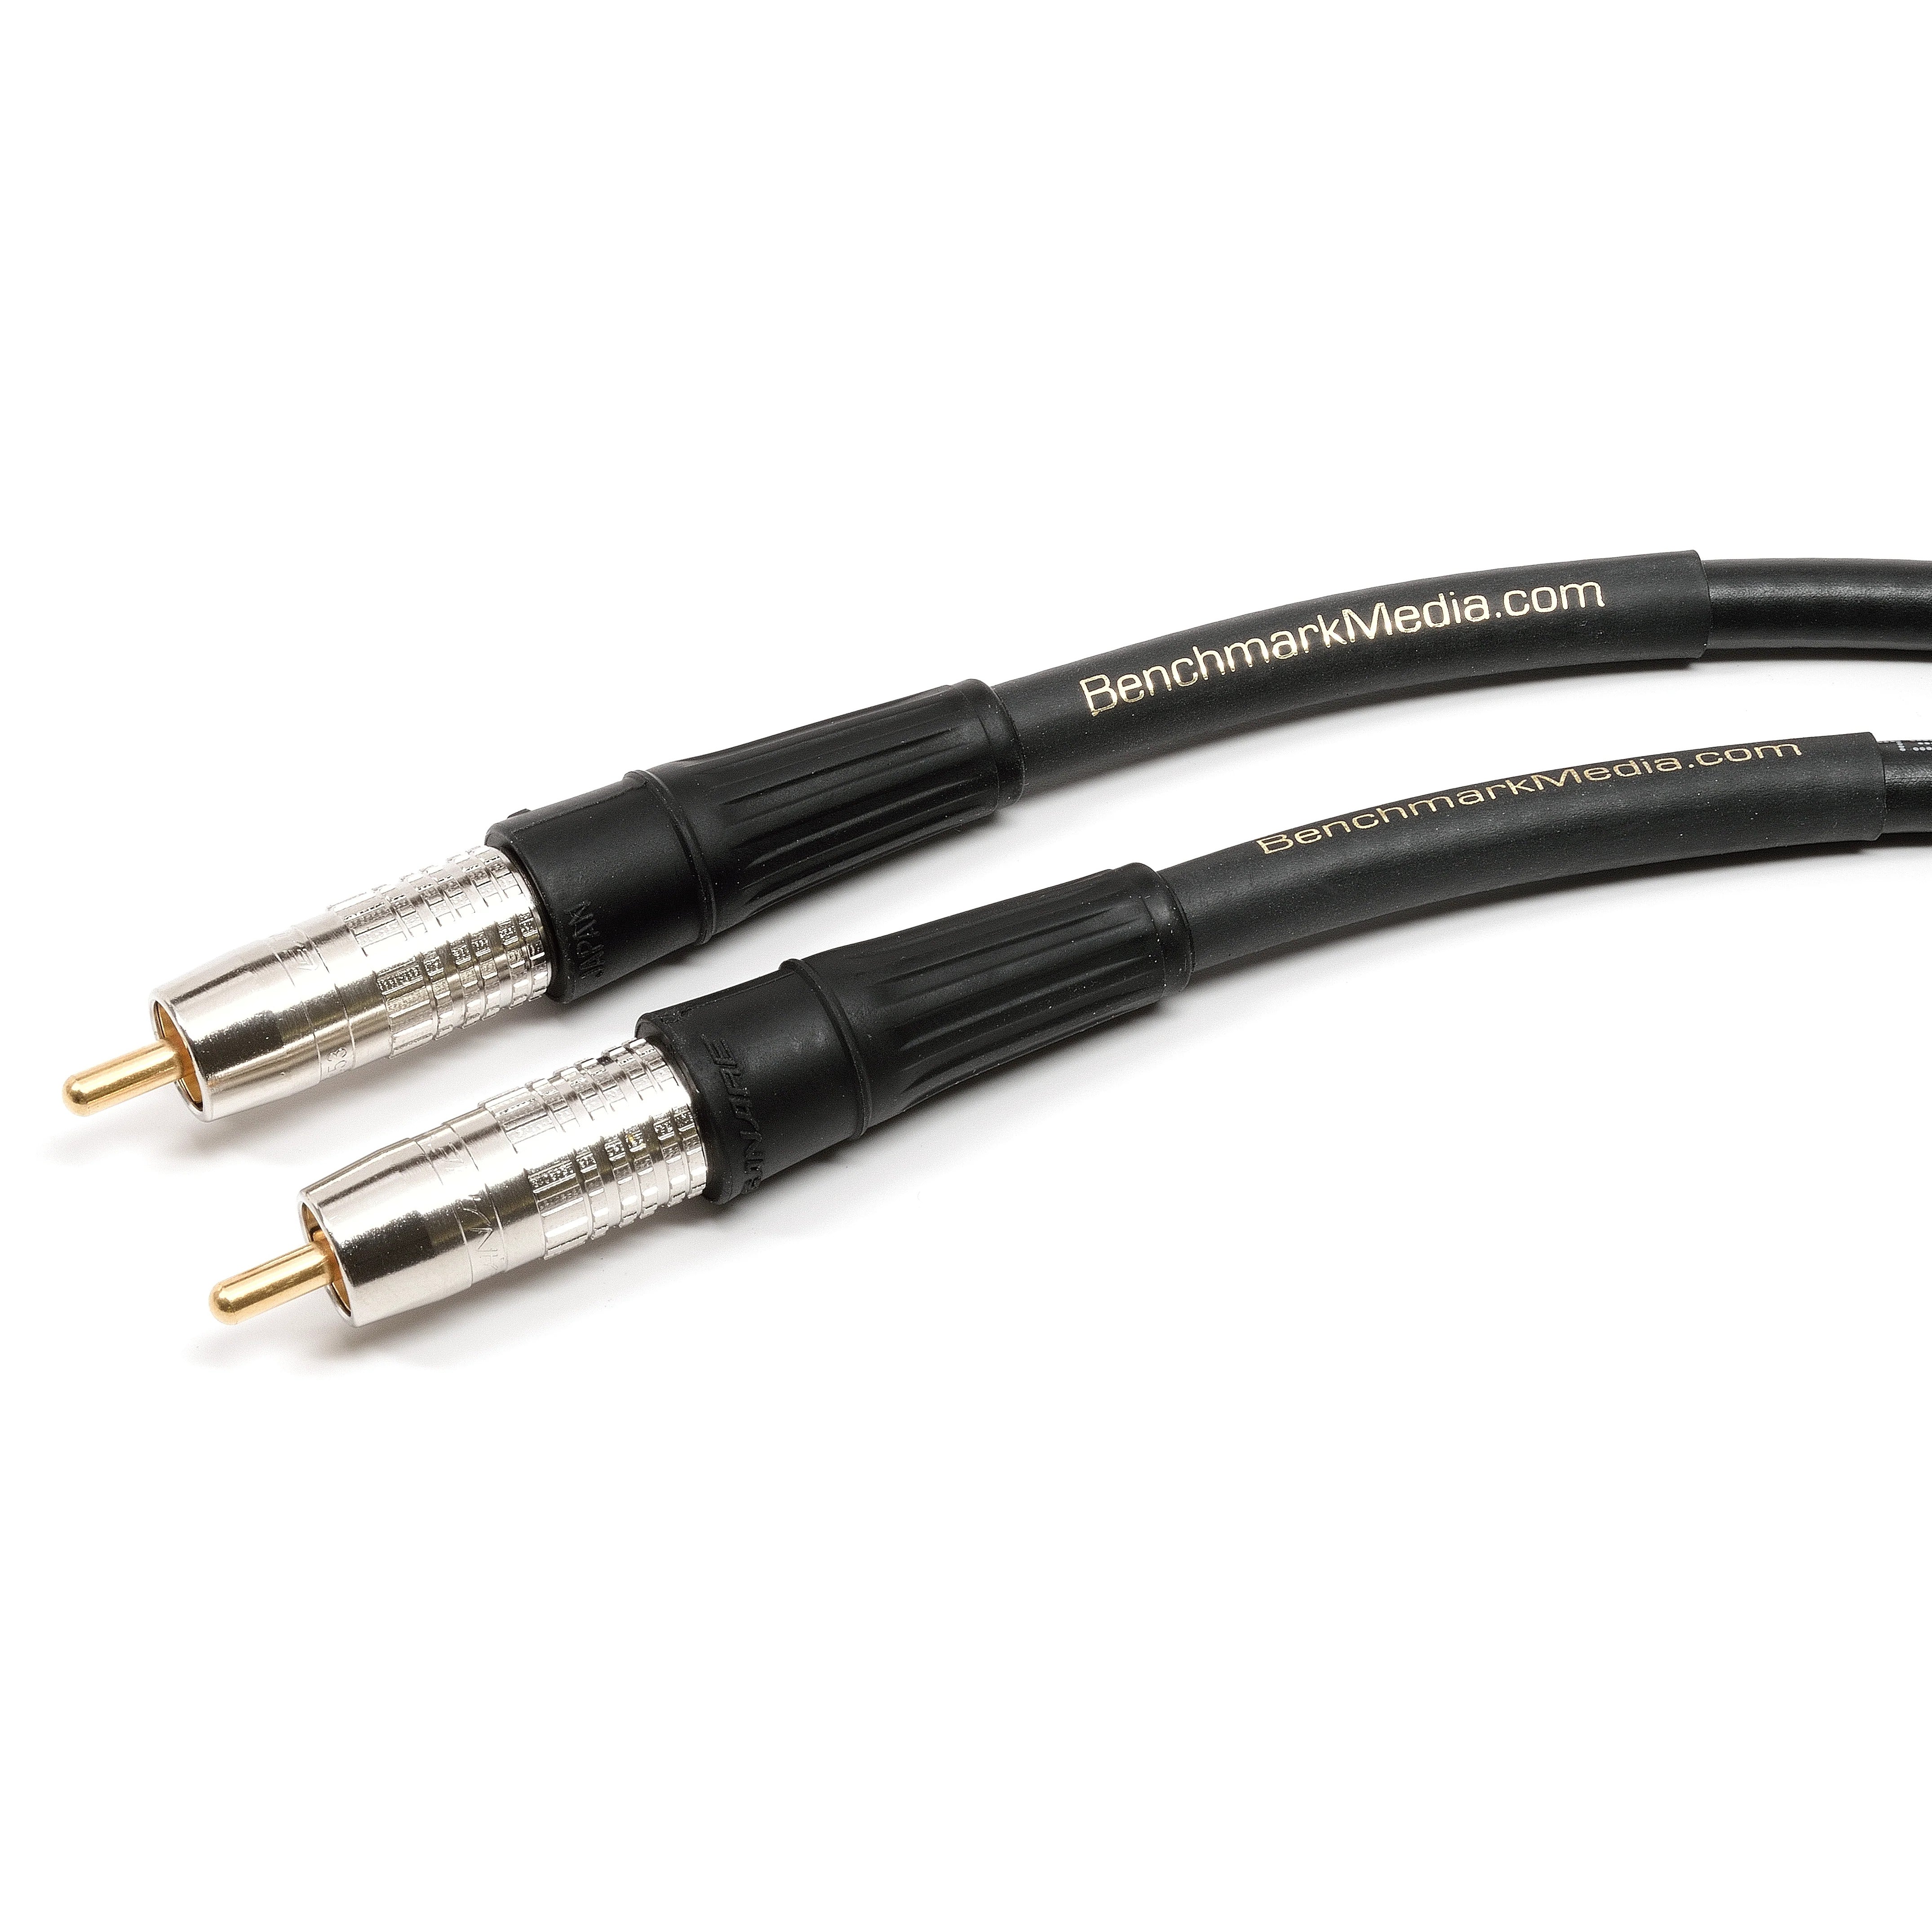 Benchmark Analog Digital RCA to RCA S/PDIF 75 Ohm Cable